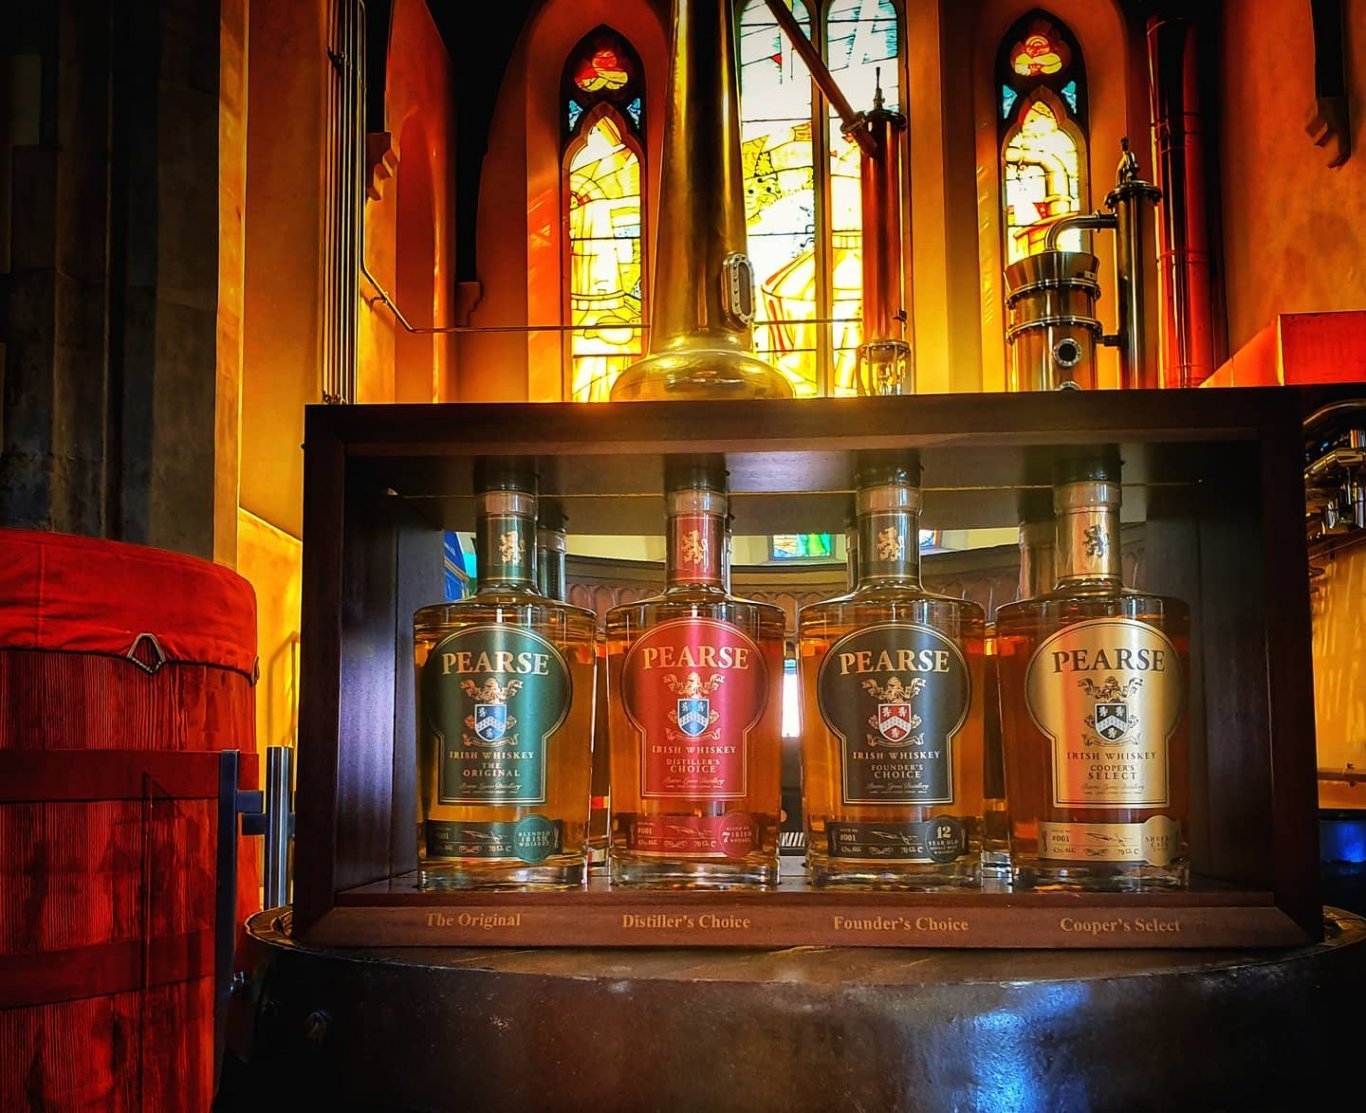 Four bottles of Pearse Lyons Irish Whiskey on whiskey barrel in Pearse Lyons Distillery